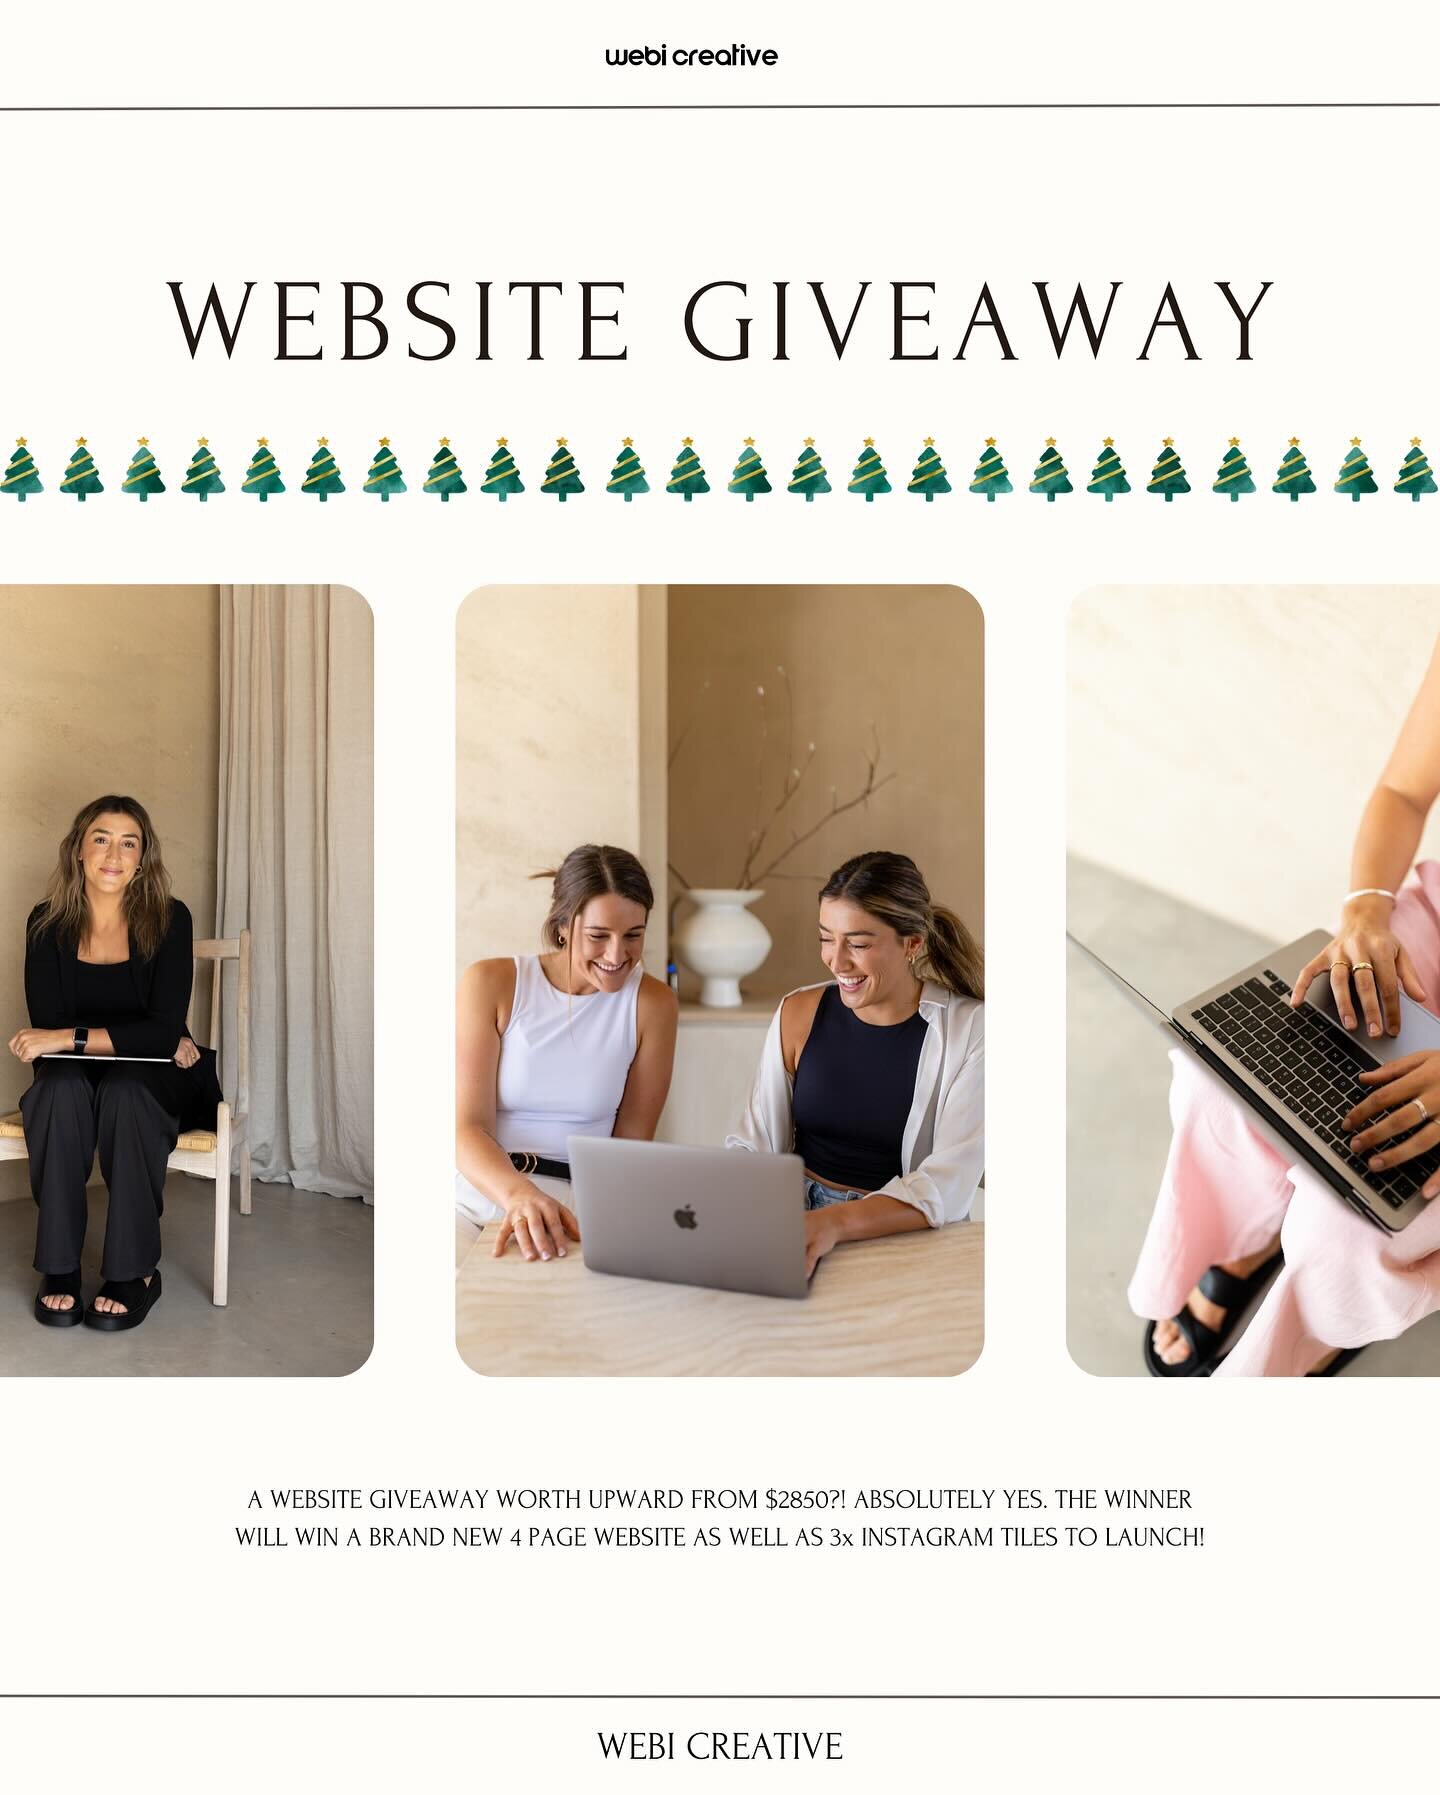 TIS THE SEASON OF GIVING! So why not give away a WEBSITE! 🎅🏻🎄🎁 

To win, simply:
1. Follow @webicreative
2. Tag a person/business account who would LOVE to get their hands on a new website!
3. Share it to your story 

〰️ 1 tag = 1 entry, so get t